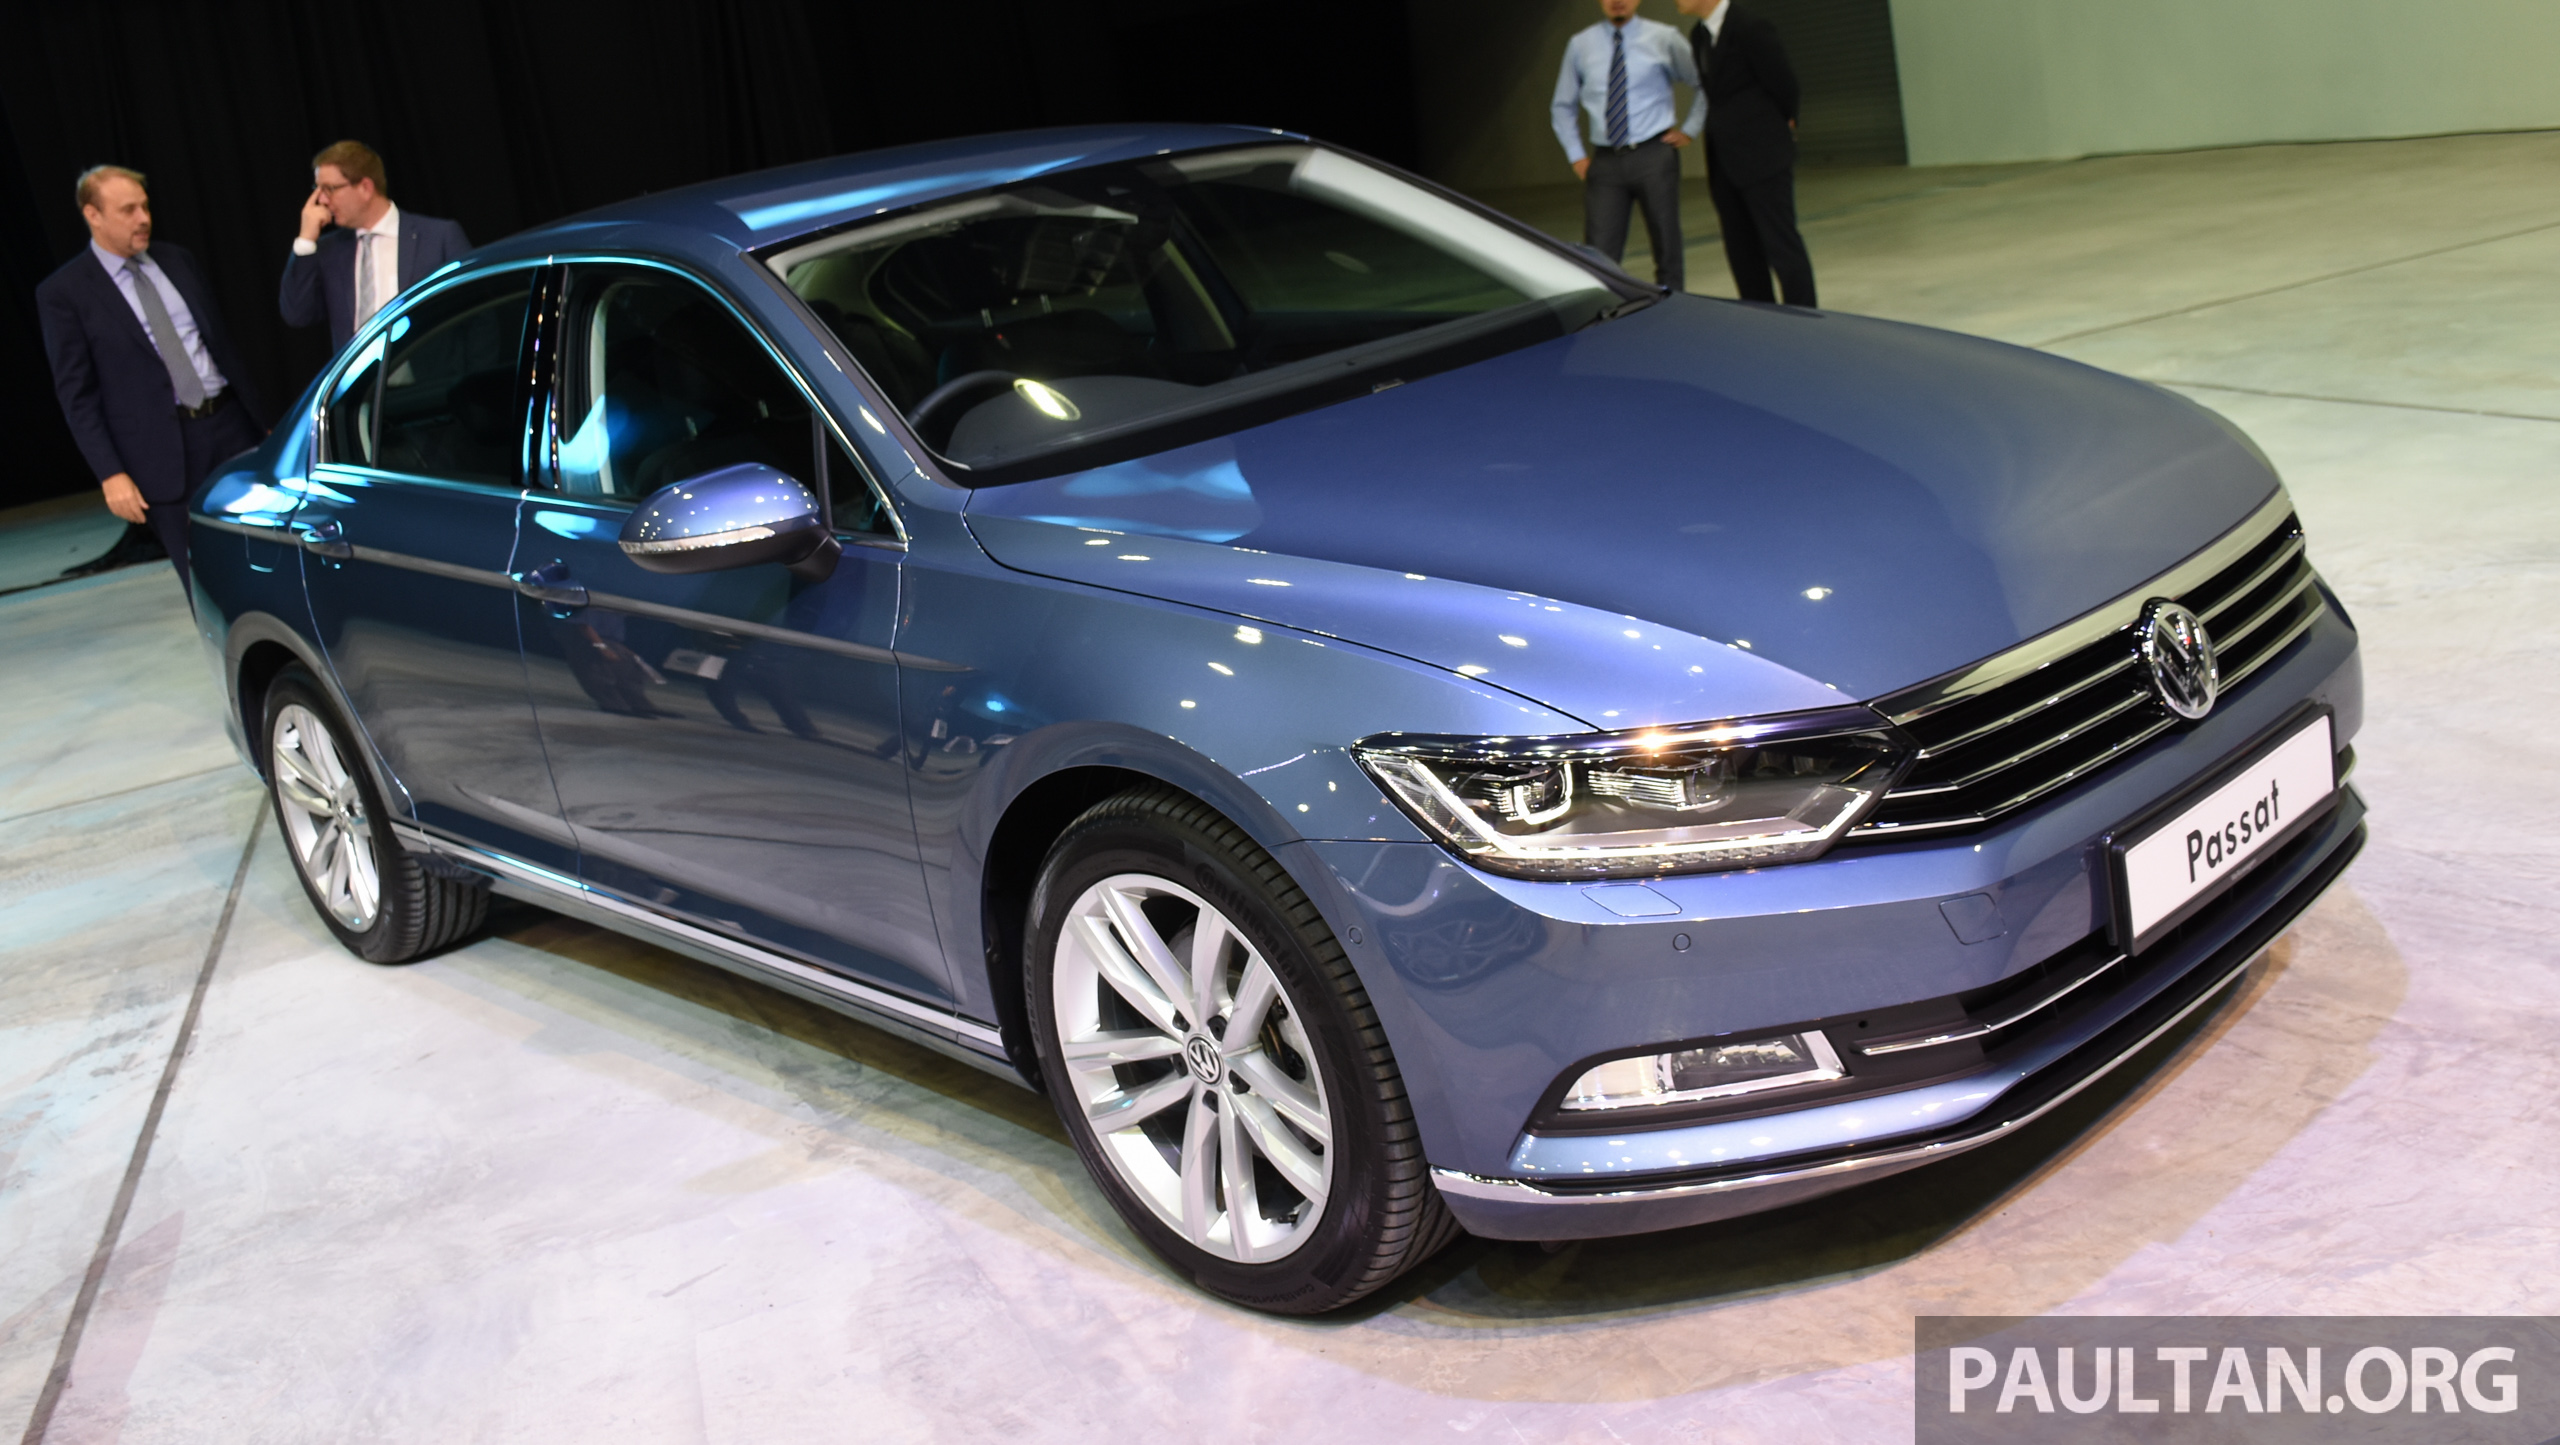 B8 Volkswagen Passat officially launched in Malaysia - three